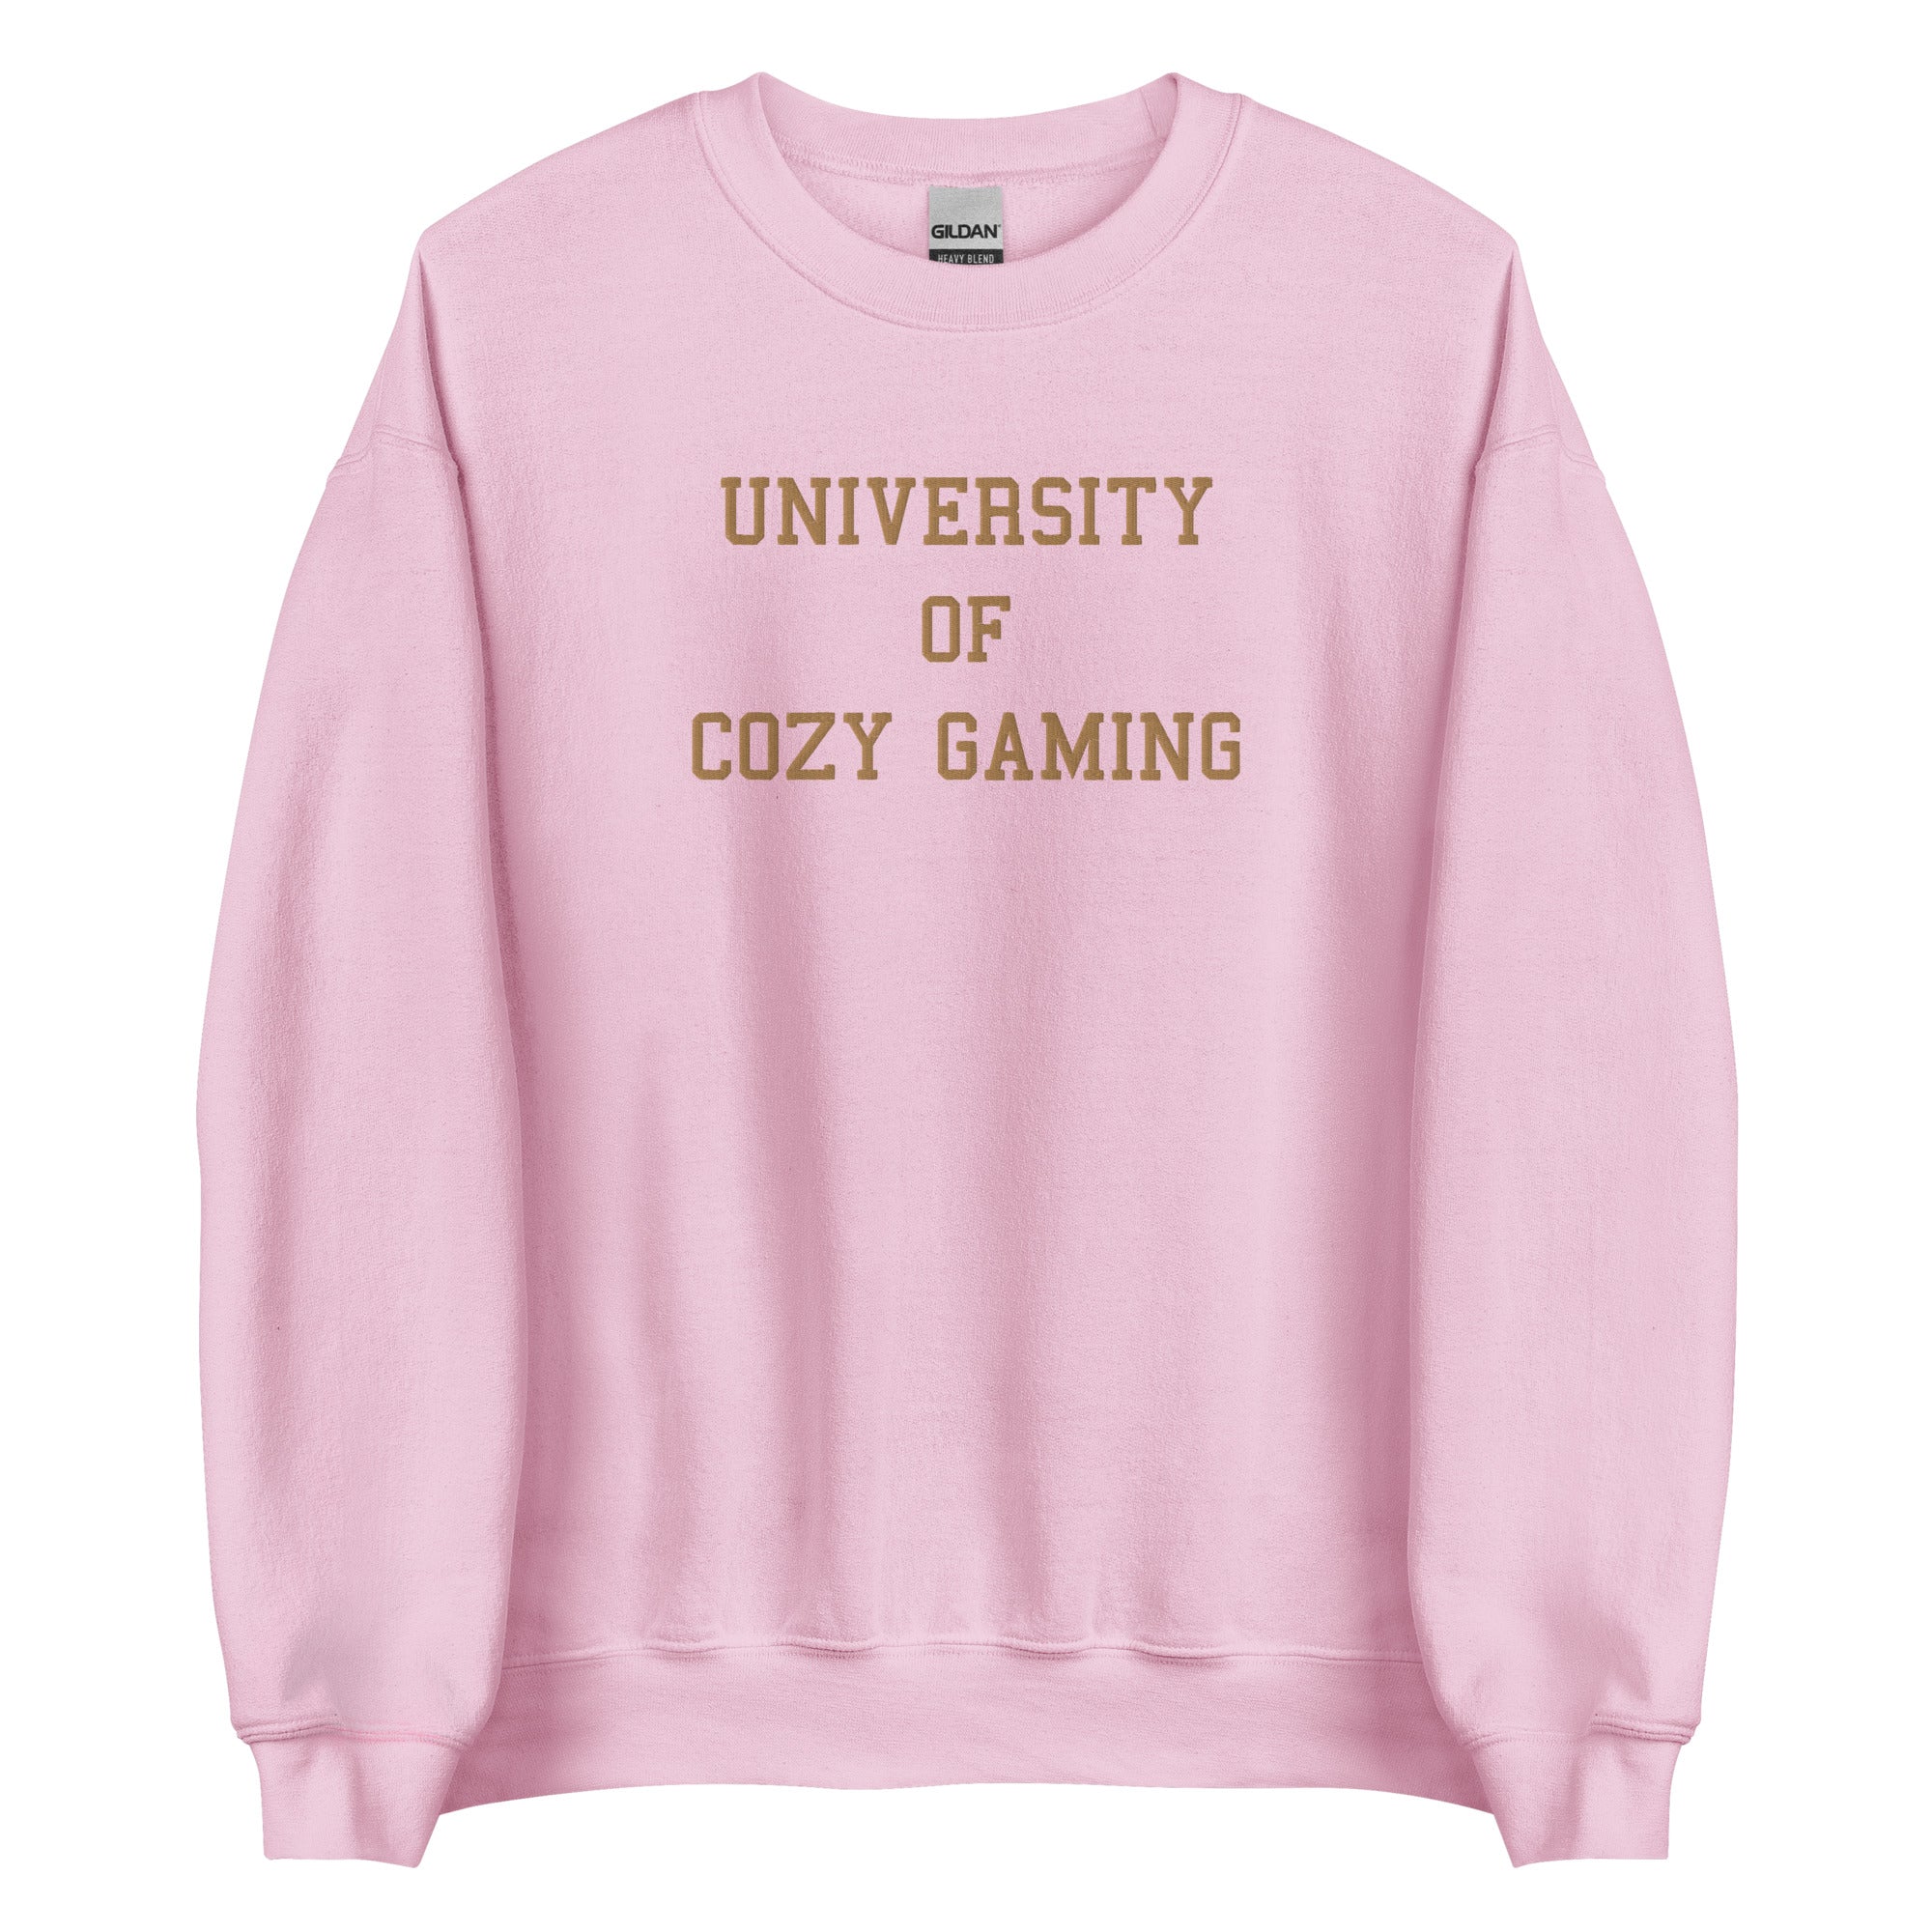 University of Cozy Gaming | Embroidered Unisex Sweatshirt | Coy Gamer Threads and Thistles Inventory Light Pink S 